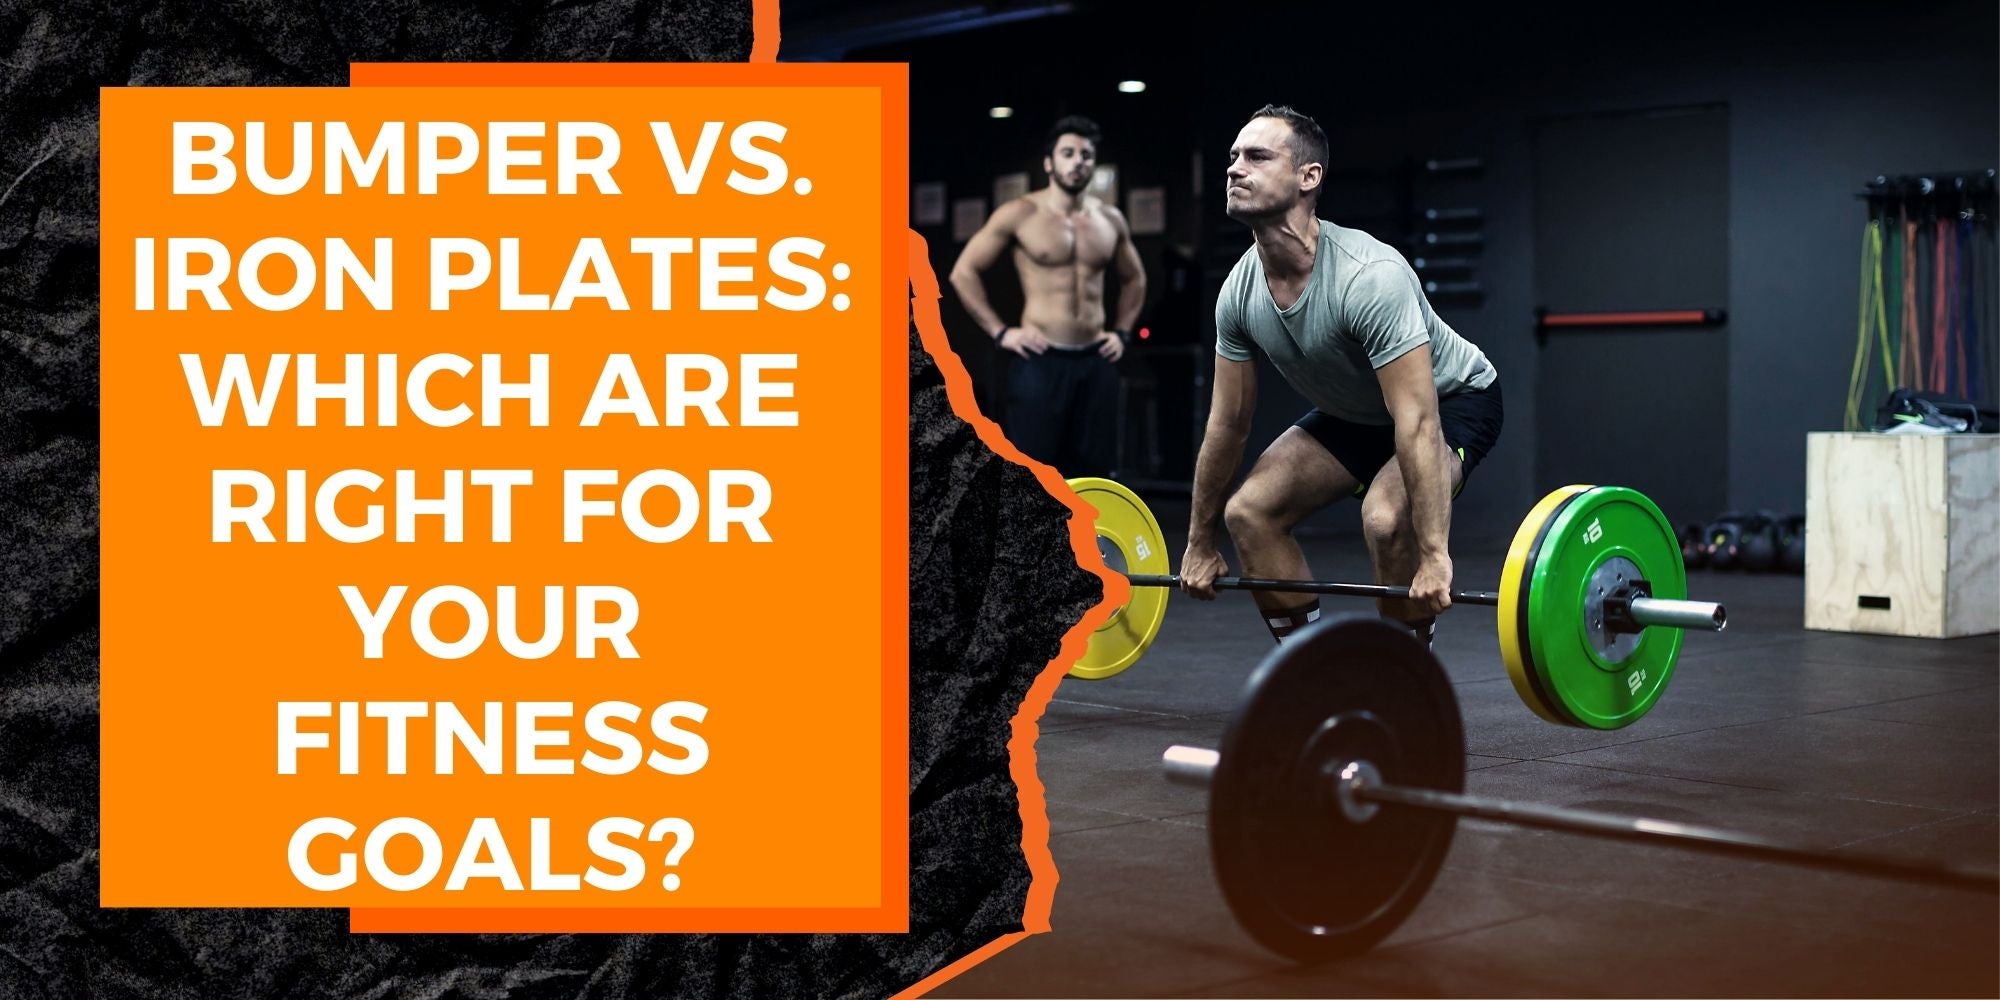 Bumper Plates vs. Iron Plates: Which are Right for Your Fitness Goals?